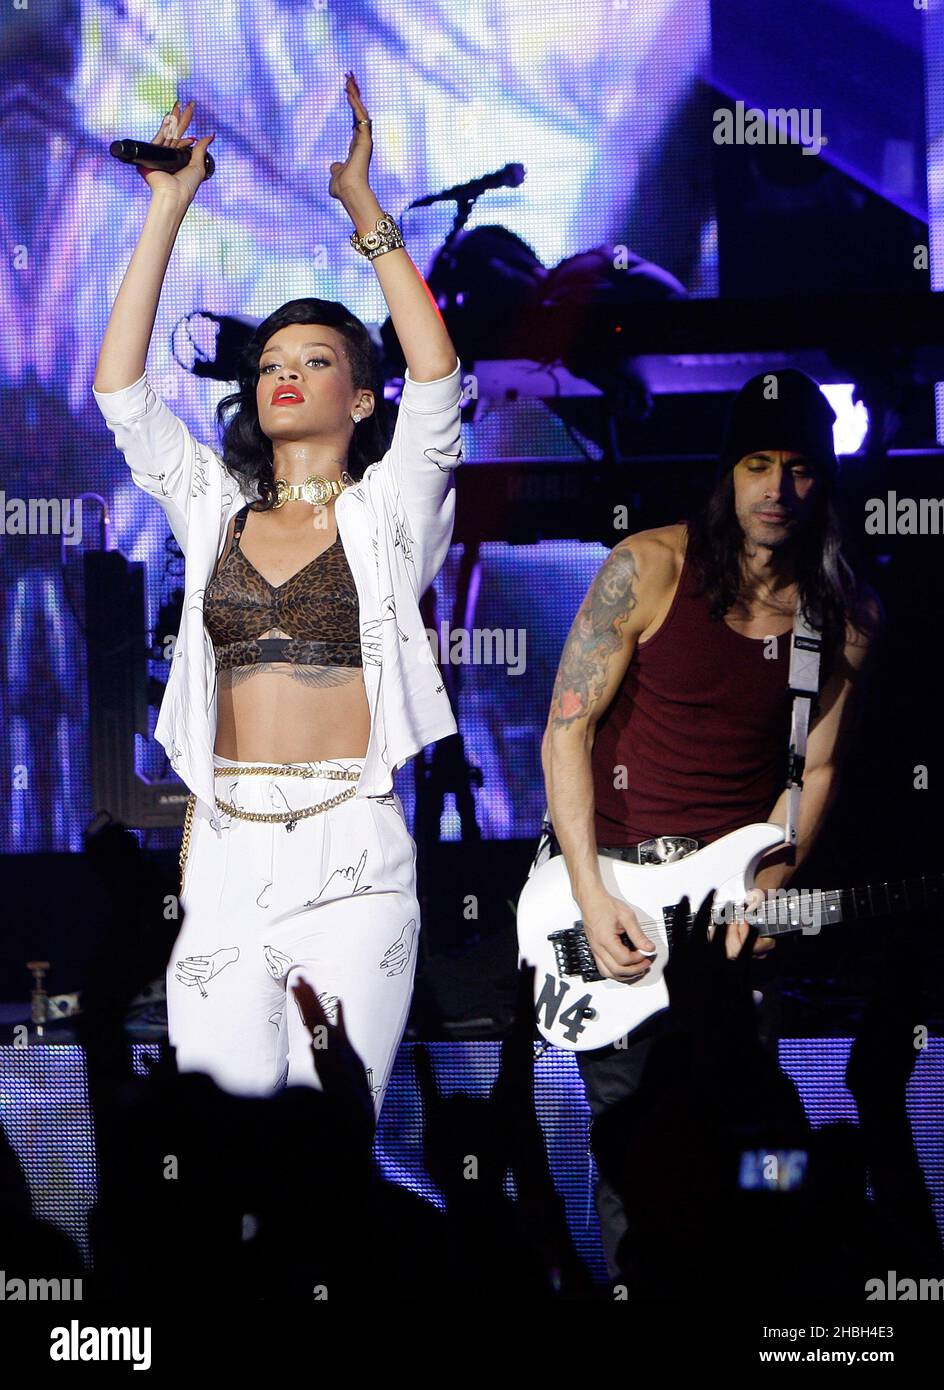 Rihanna performs a secret gig as part of her 777 tour at the HMV Forum in Kentish Town, London. Stock Photo